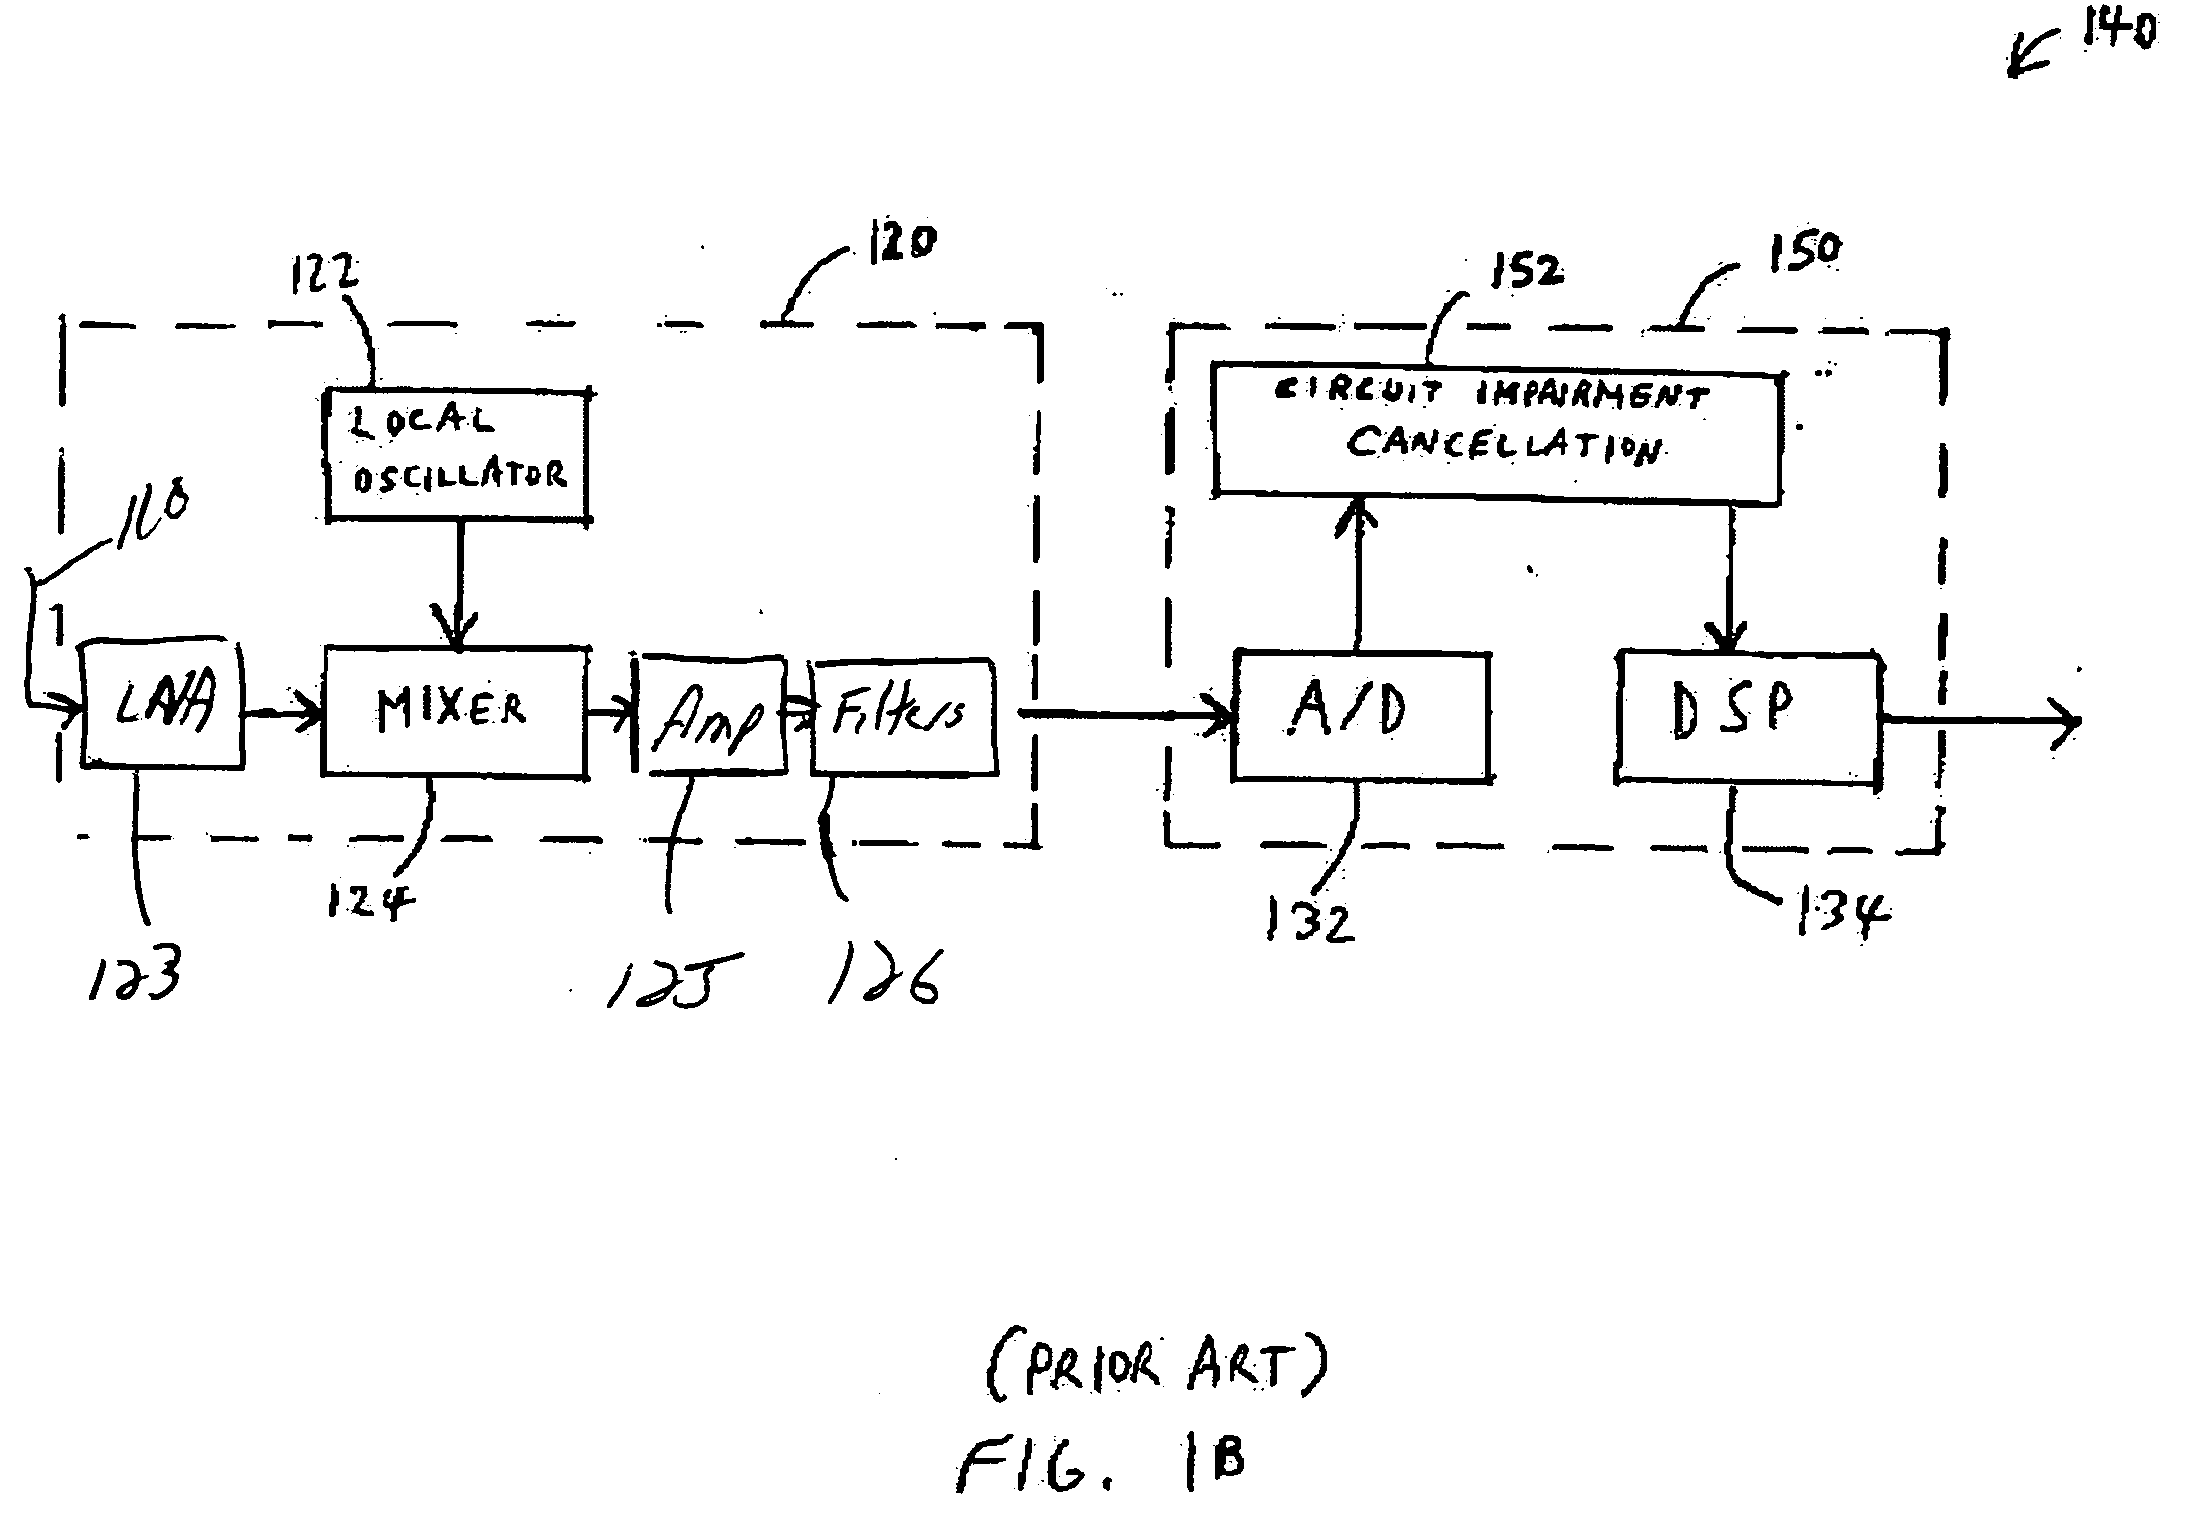 Apparatus and method of multiple antenna receiver combining of high data rate wideband packetized wireless communication signals